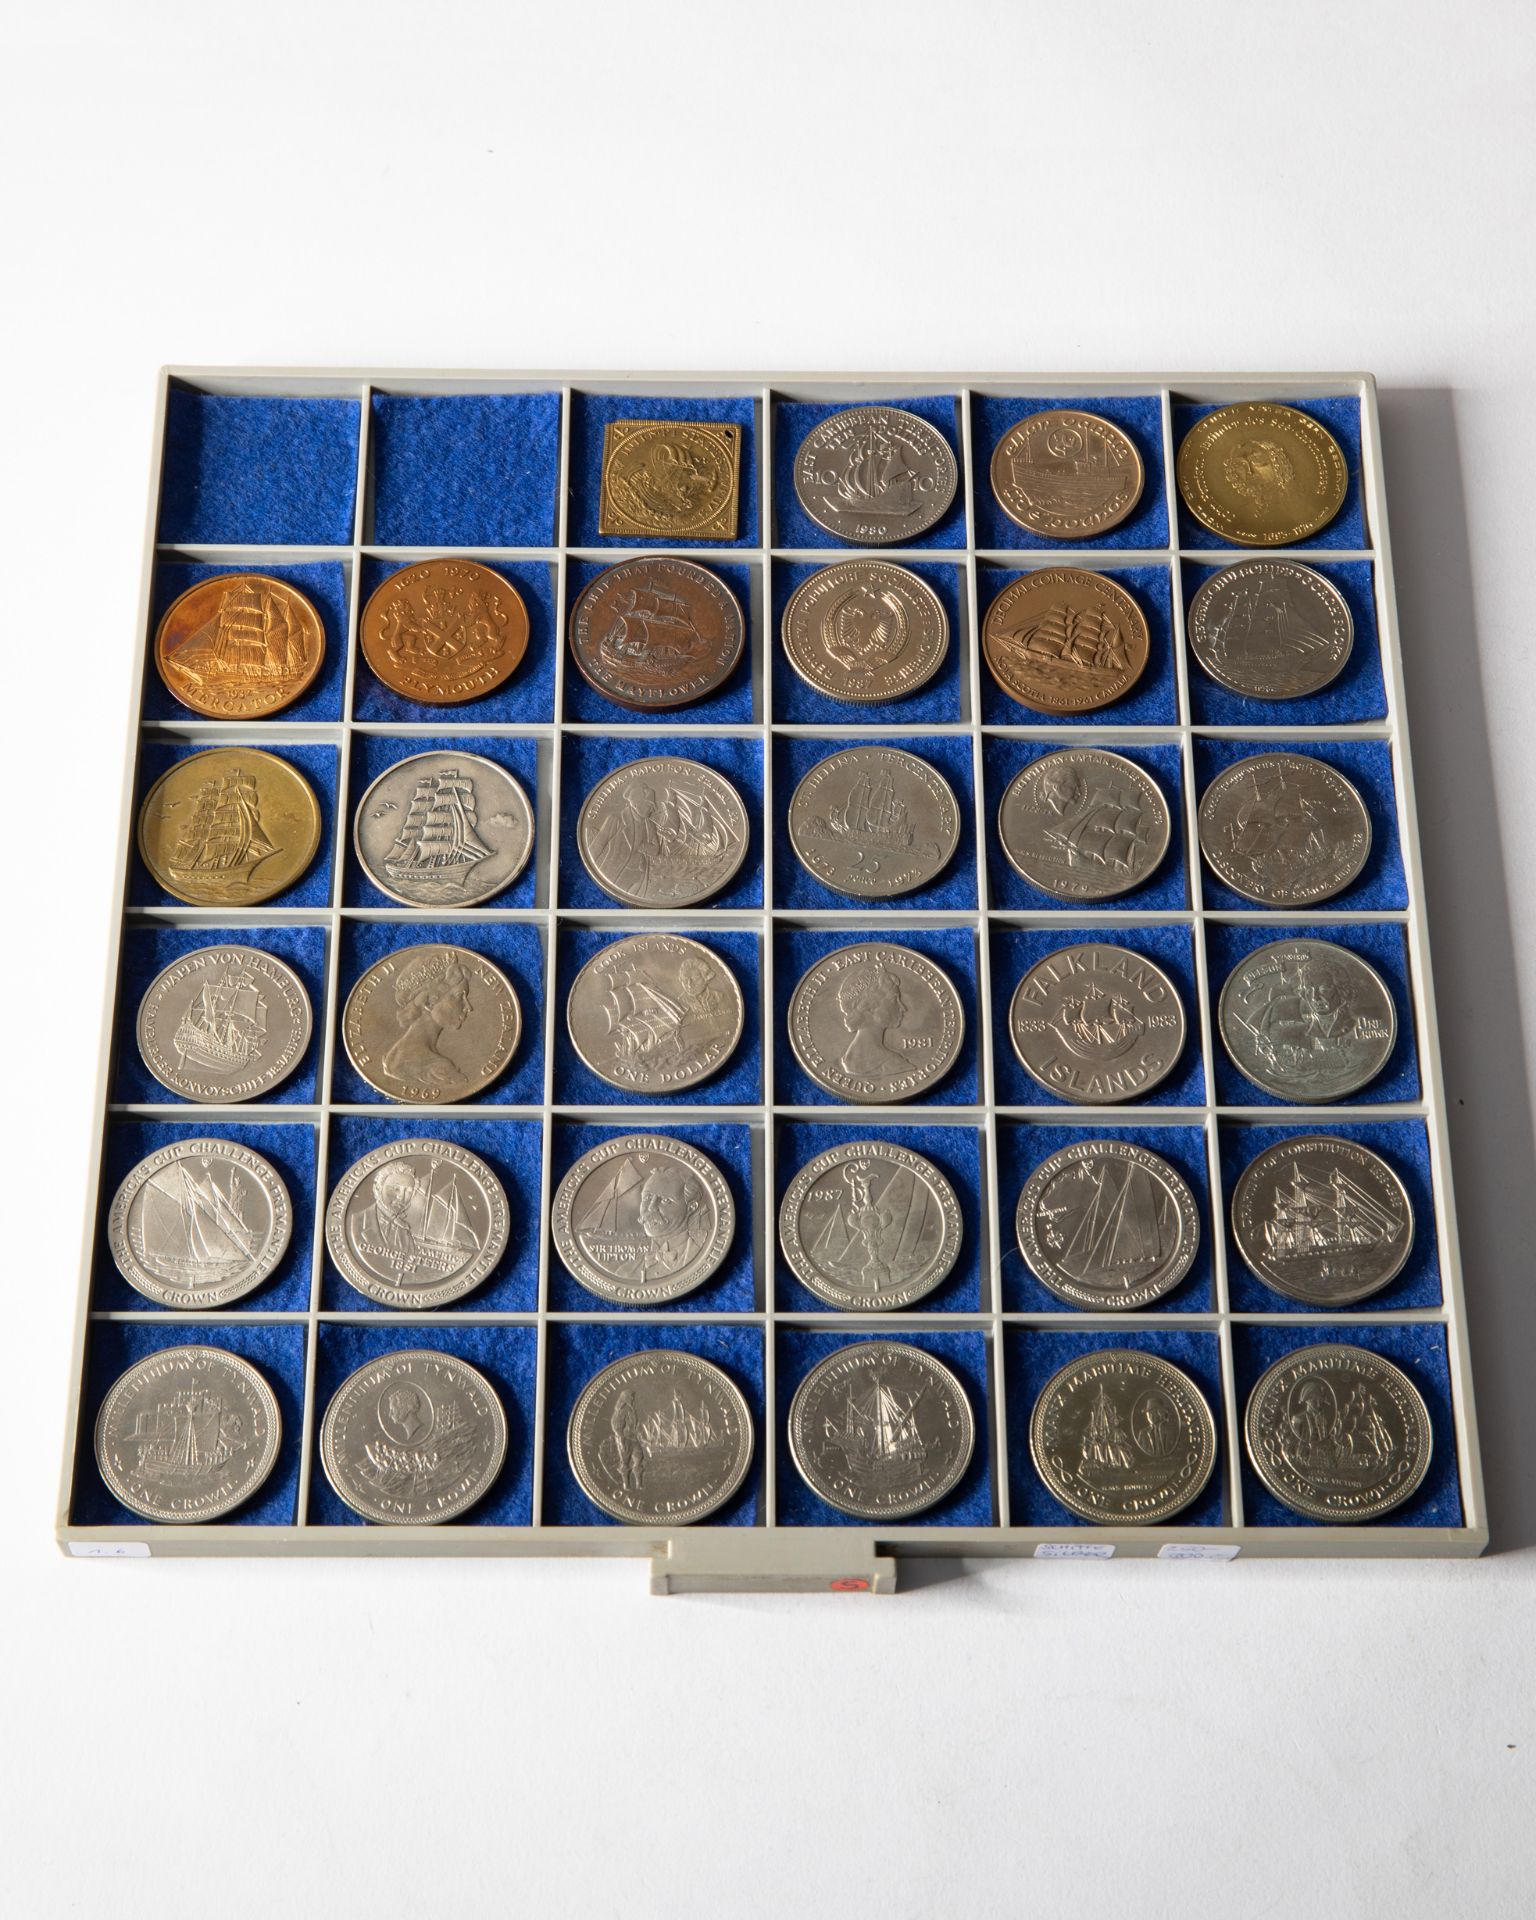 26 silver coins & 8 medals, ships 1969-1988 worldwide